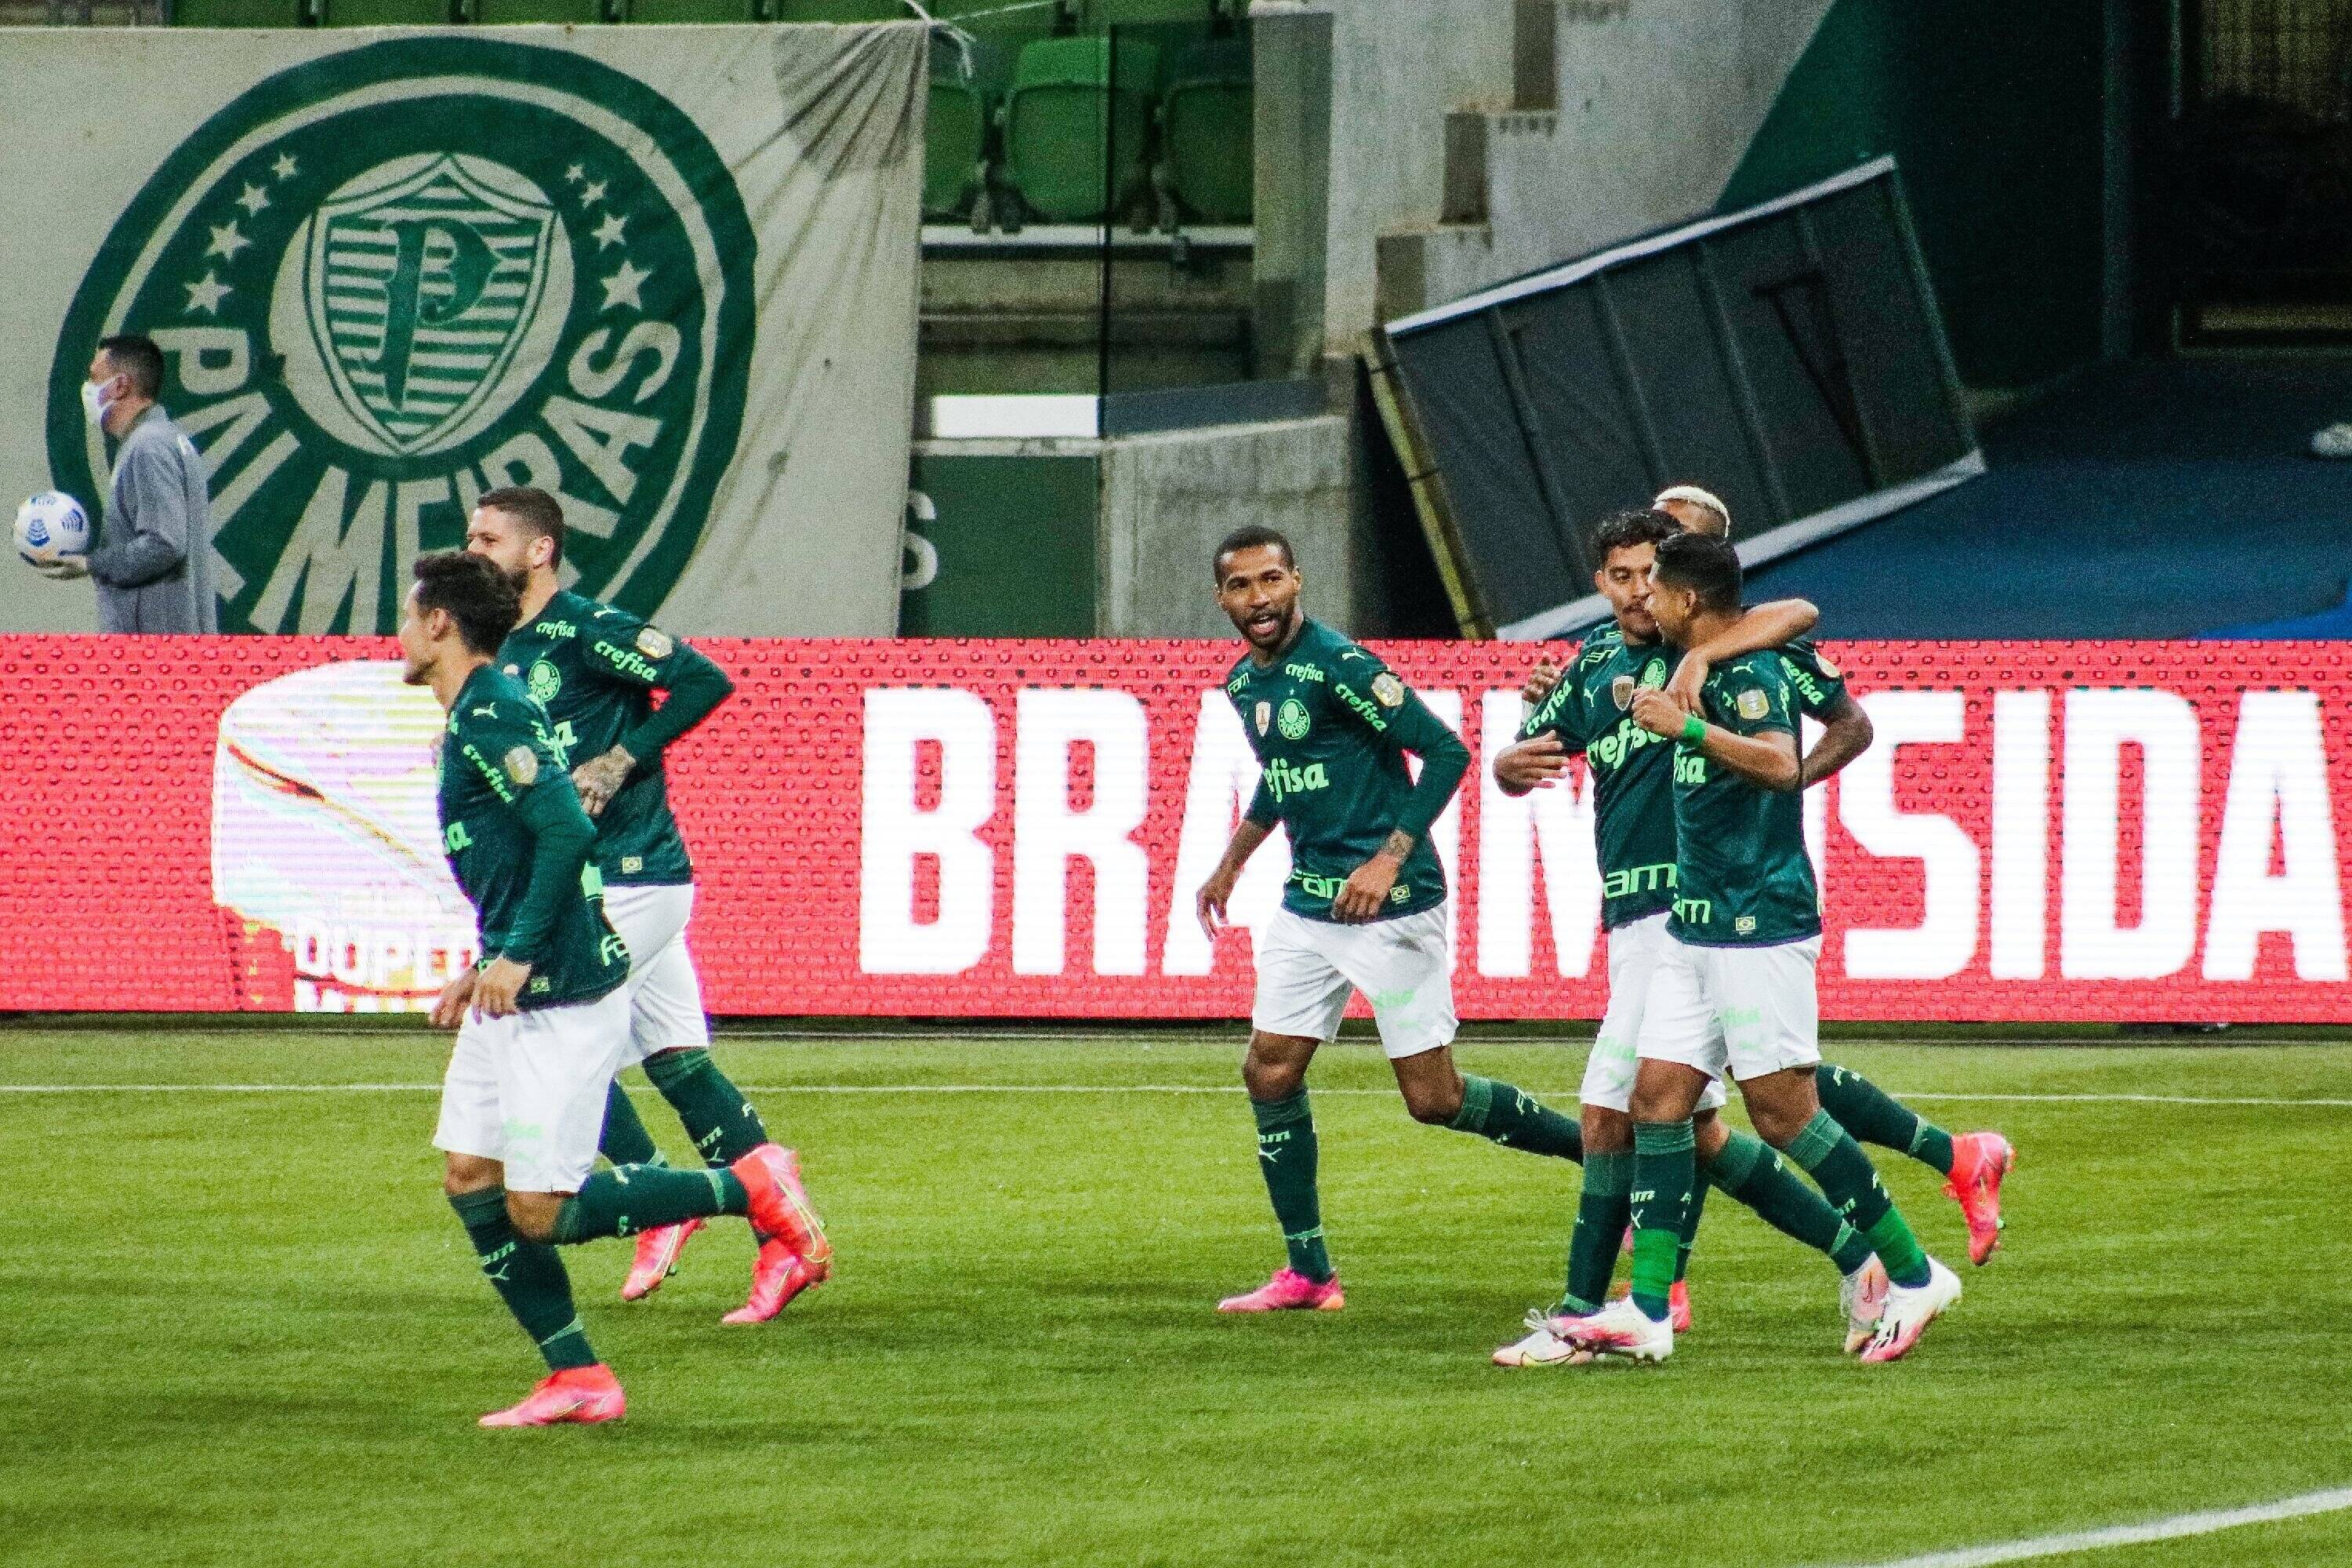 July 7, 2021, Sao Paulo, Brazil: Celebration Of Goal Scored By Raphael Veiga, From Palmeiras, During Soccer Match Again